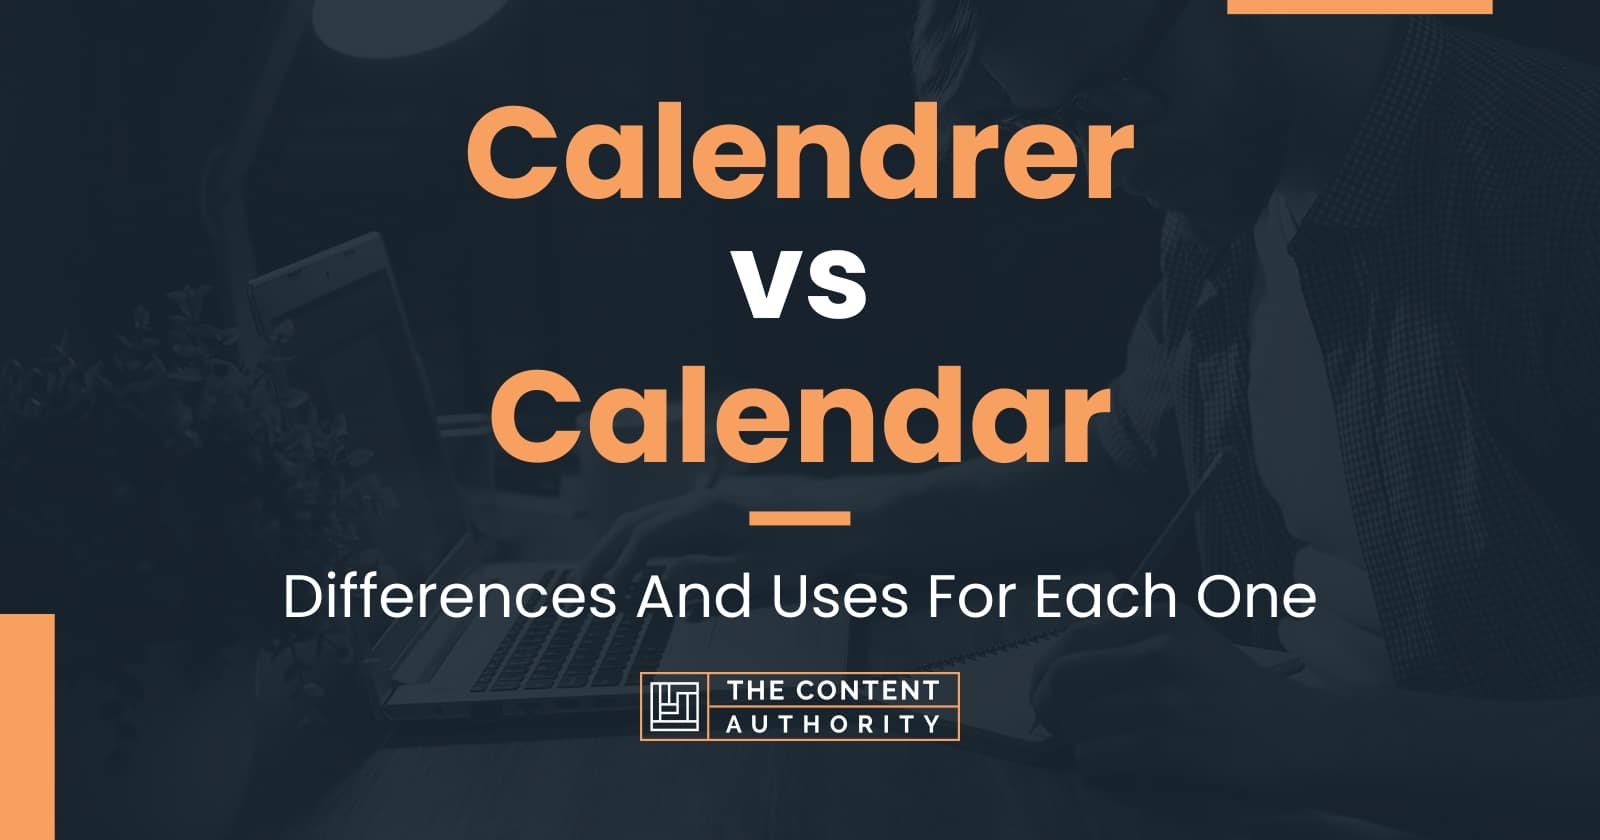 Calendrer vs Calendar Differences And Uses For Each One